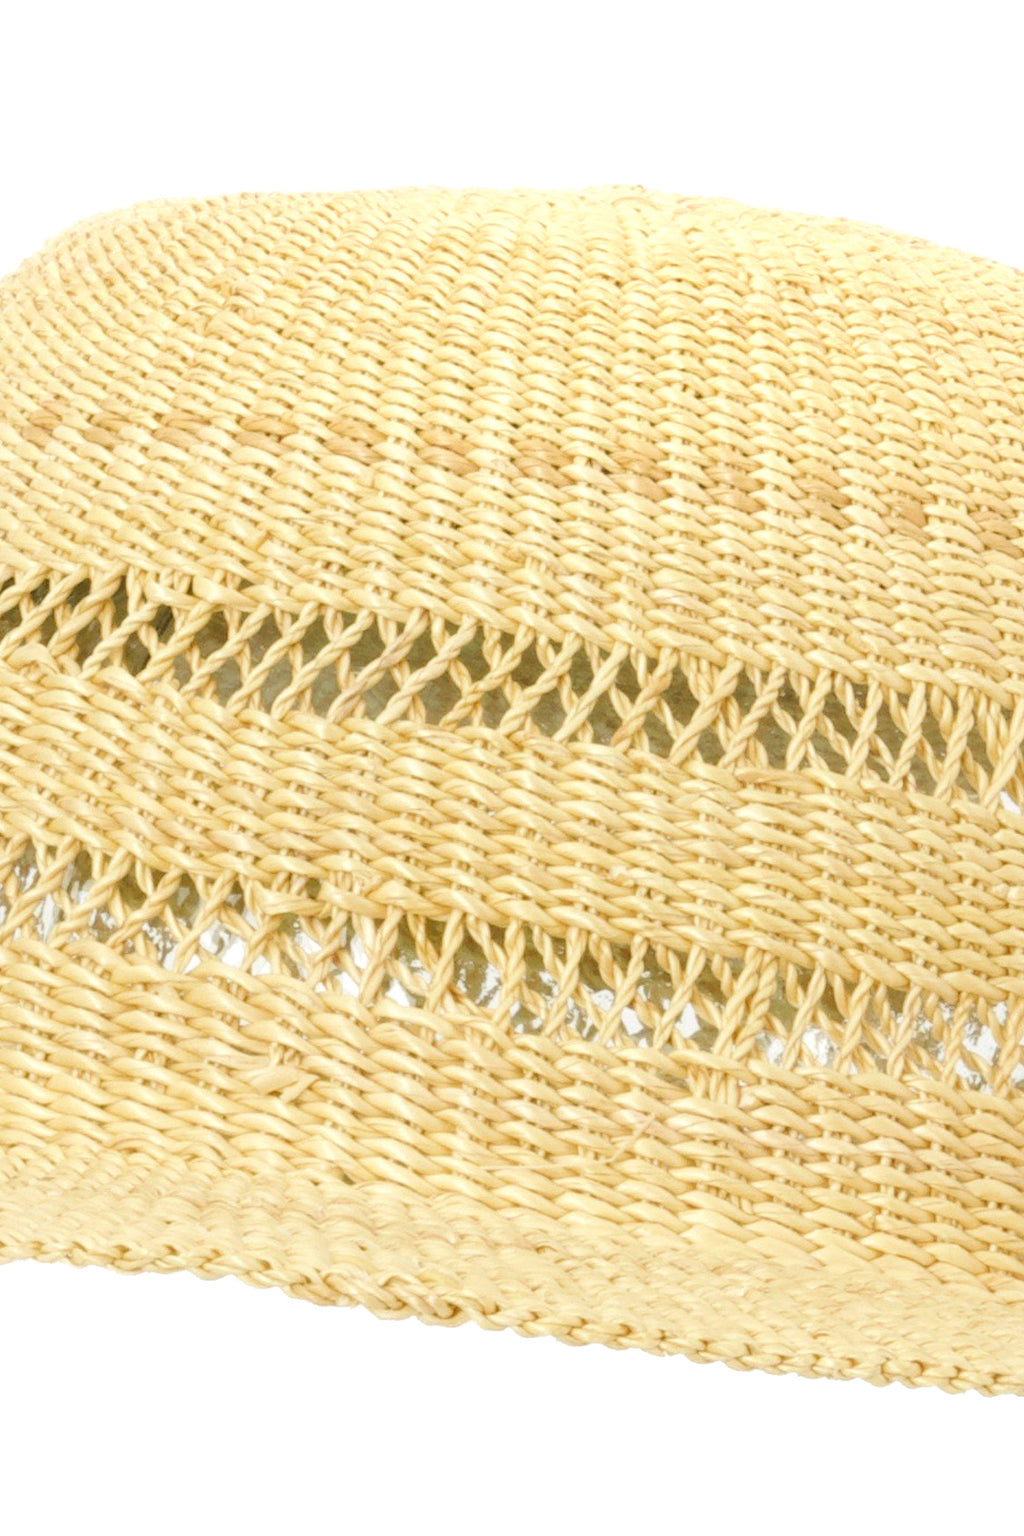 Lace Weave Short Brimmed Straw Hat with Strap